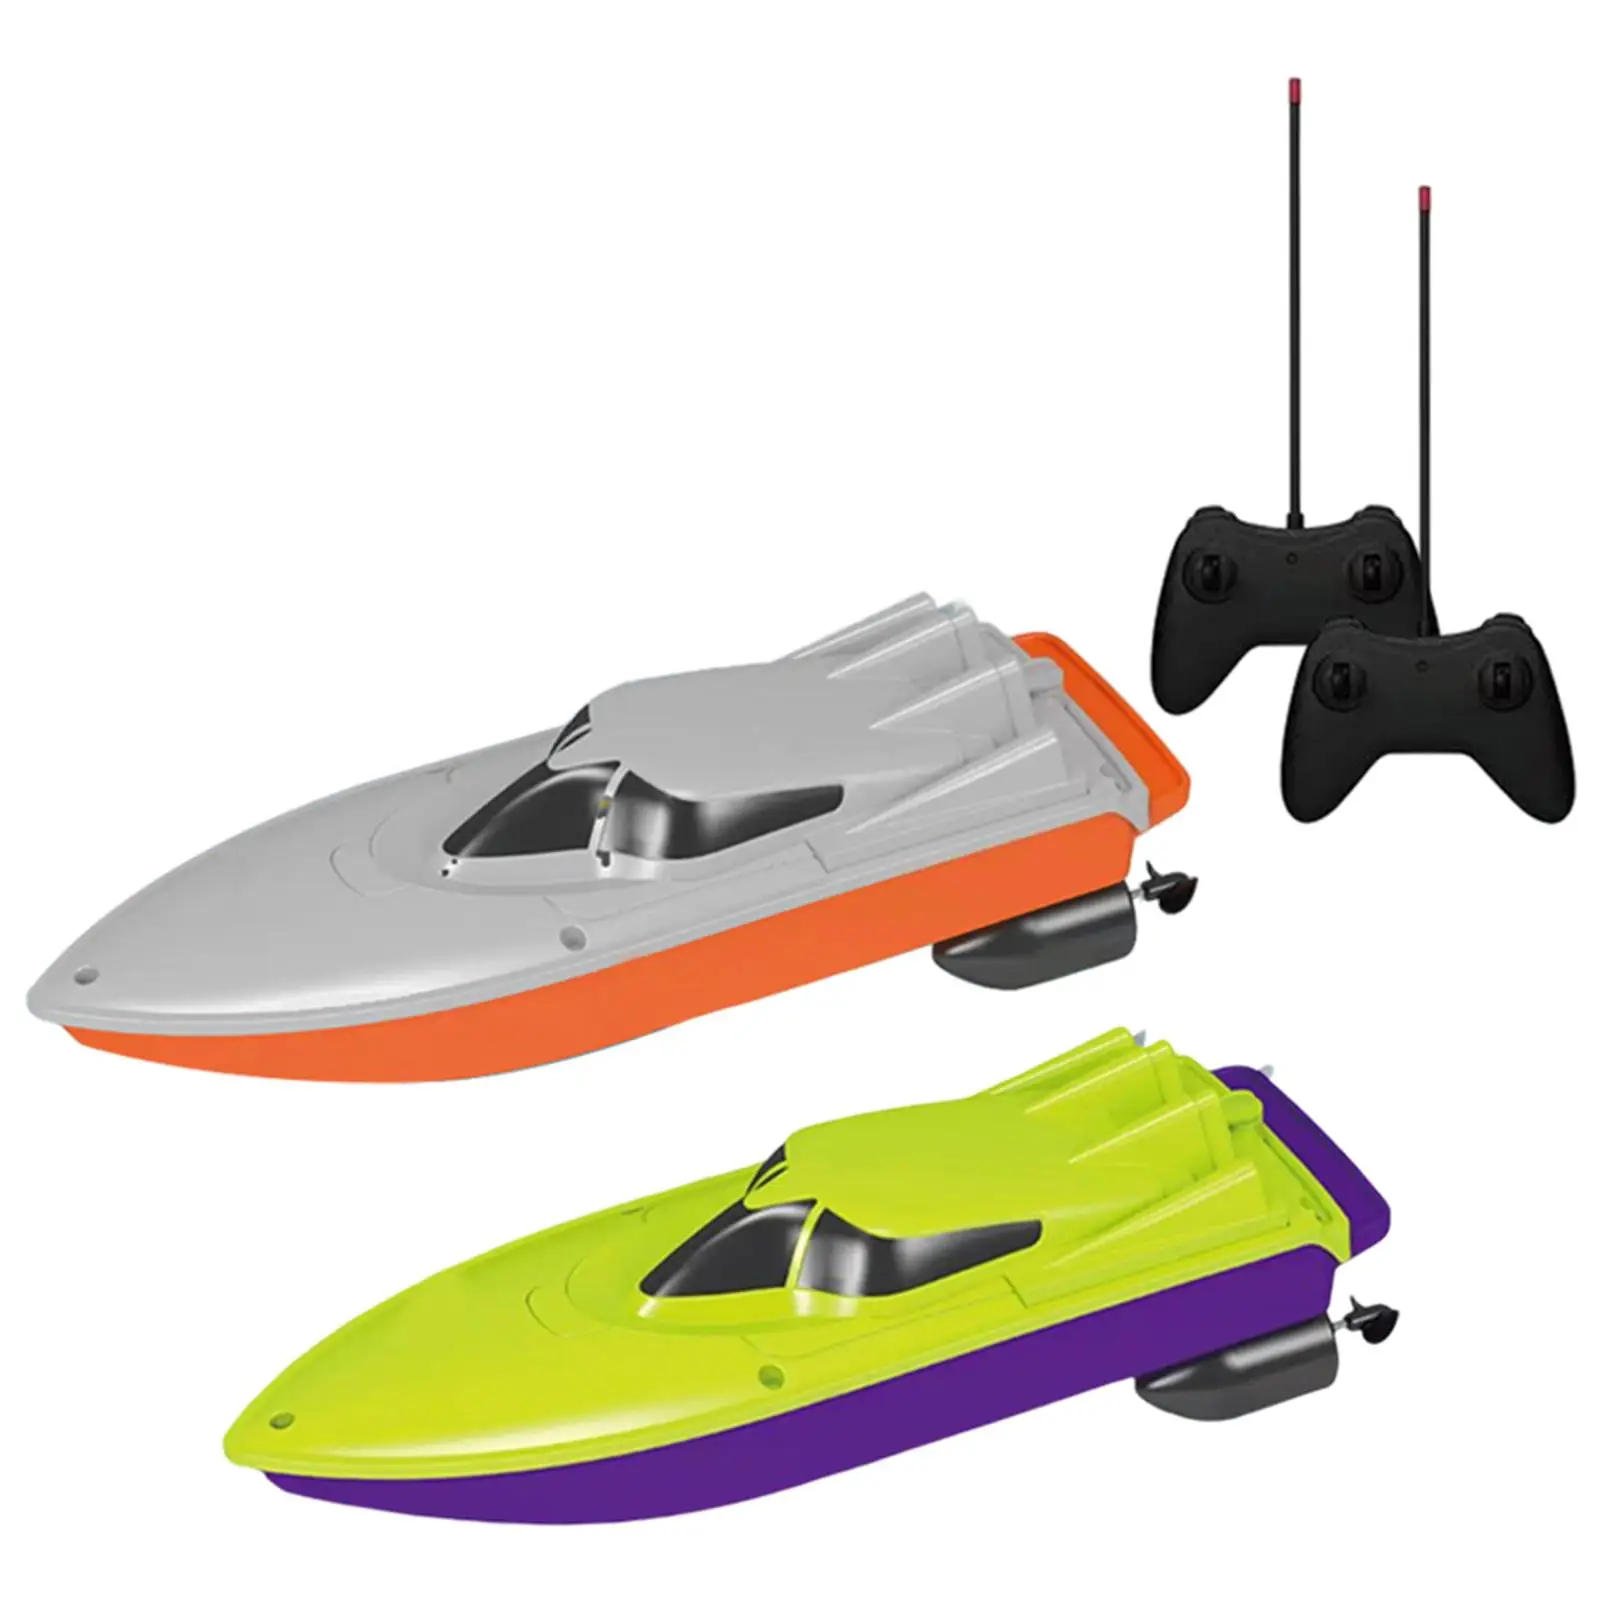 2.4G Remote Control Boat Fast RC Race Boat High Speed for River, Lakes,